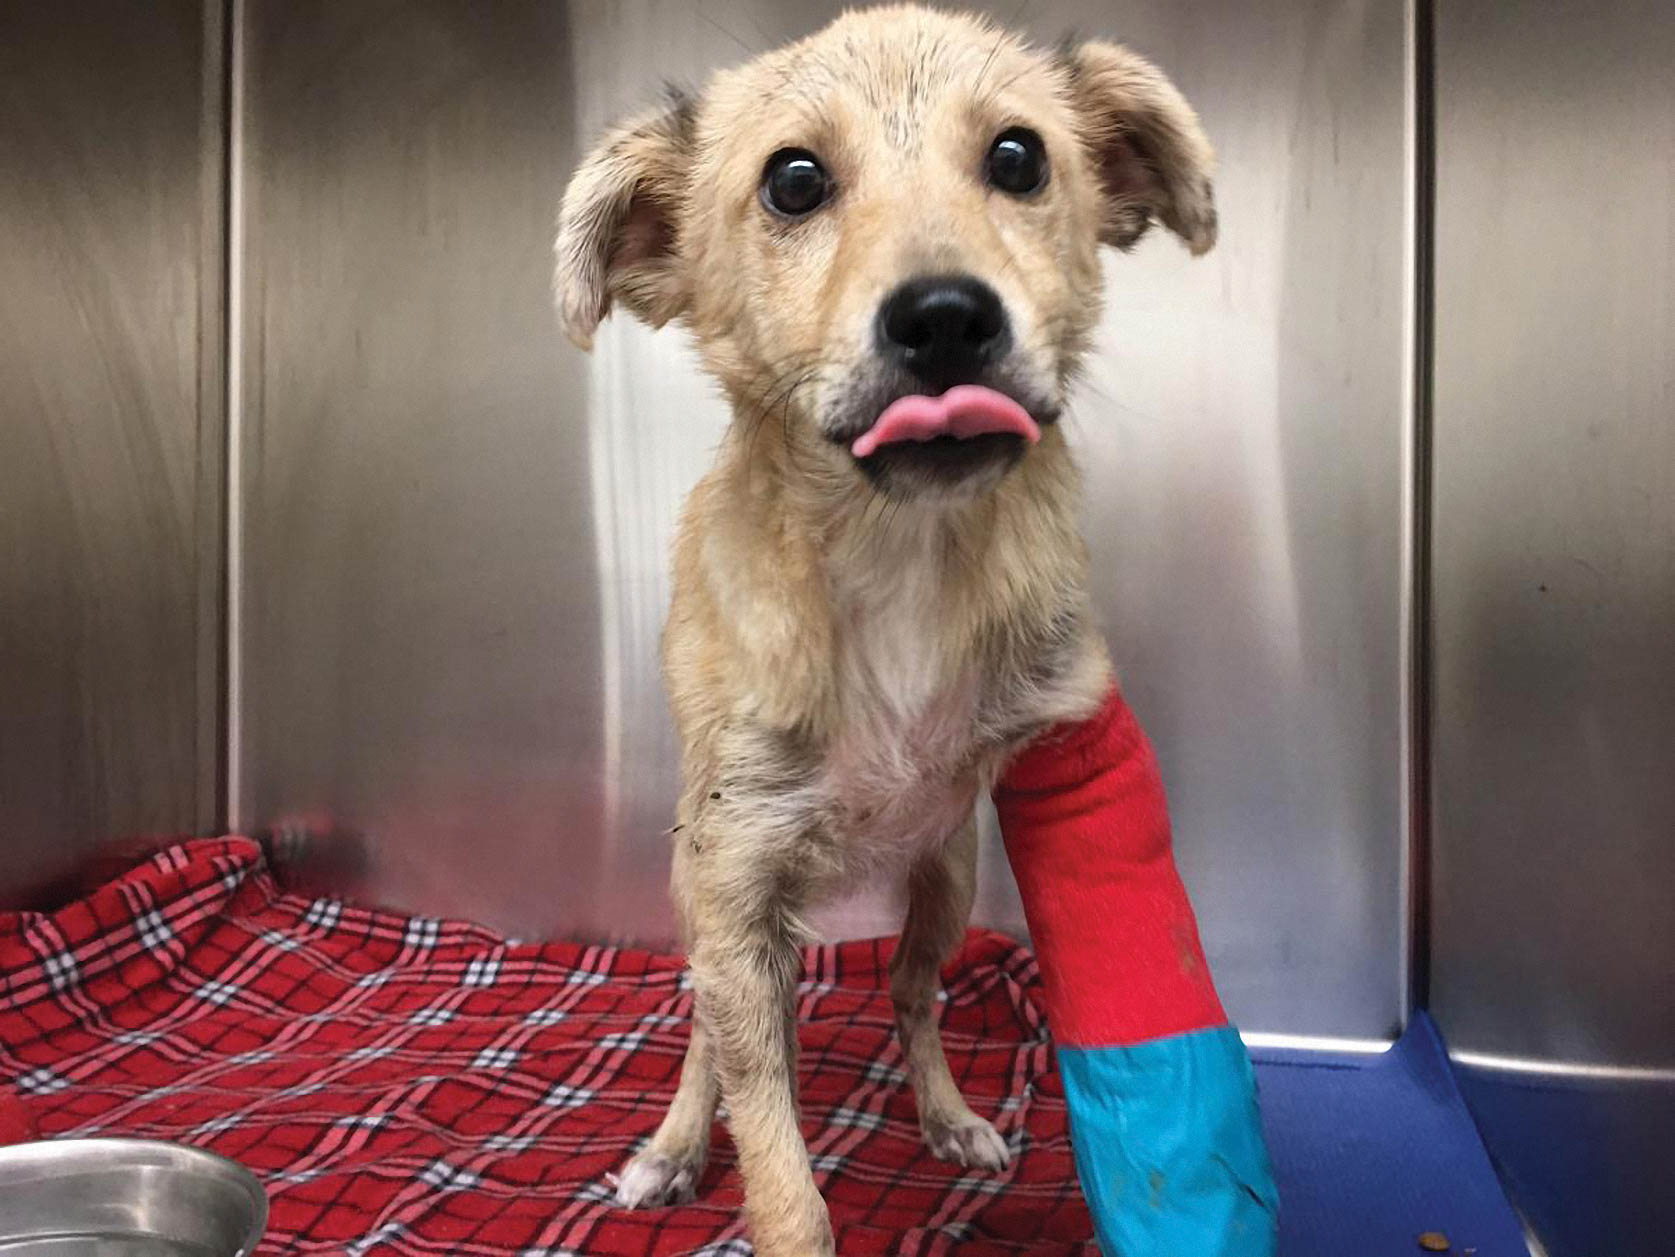 Injured dog with cast.